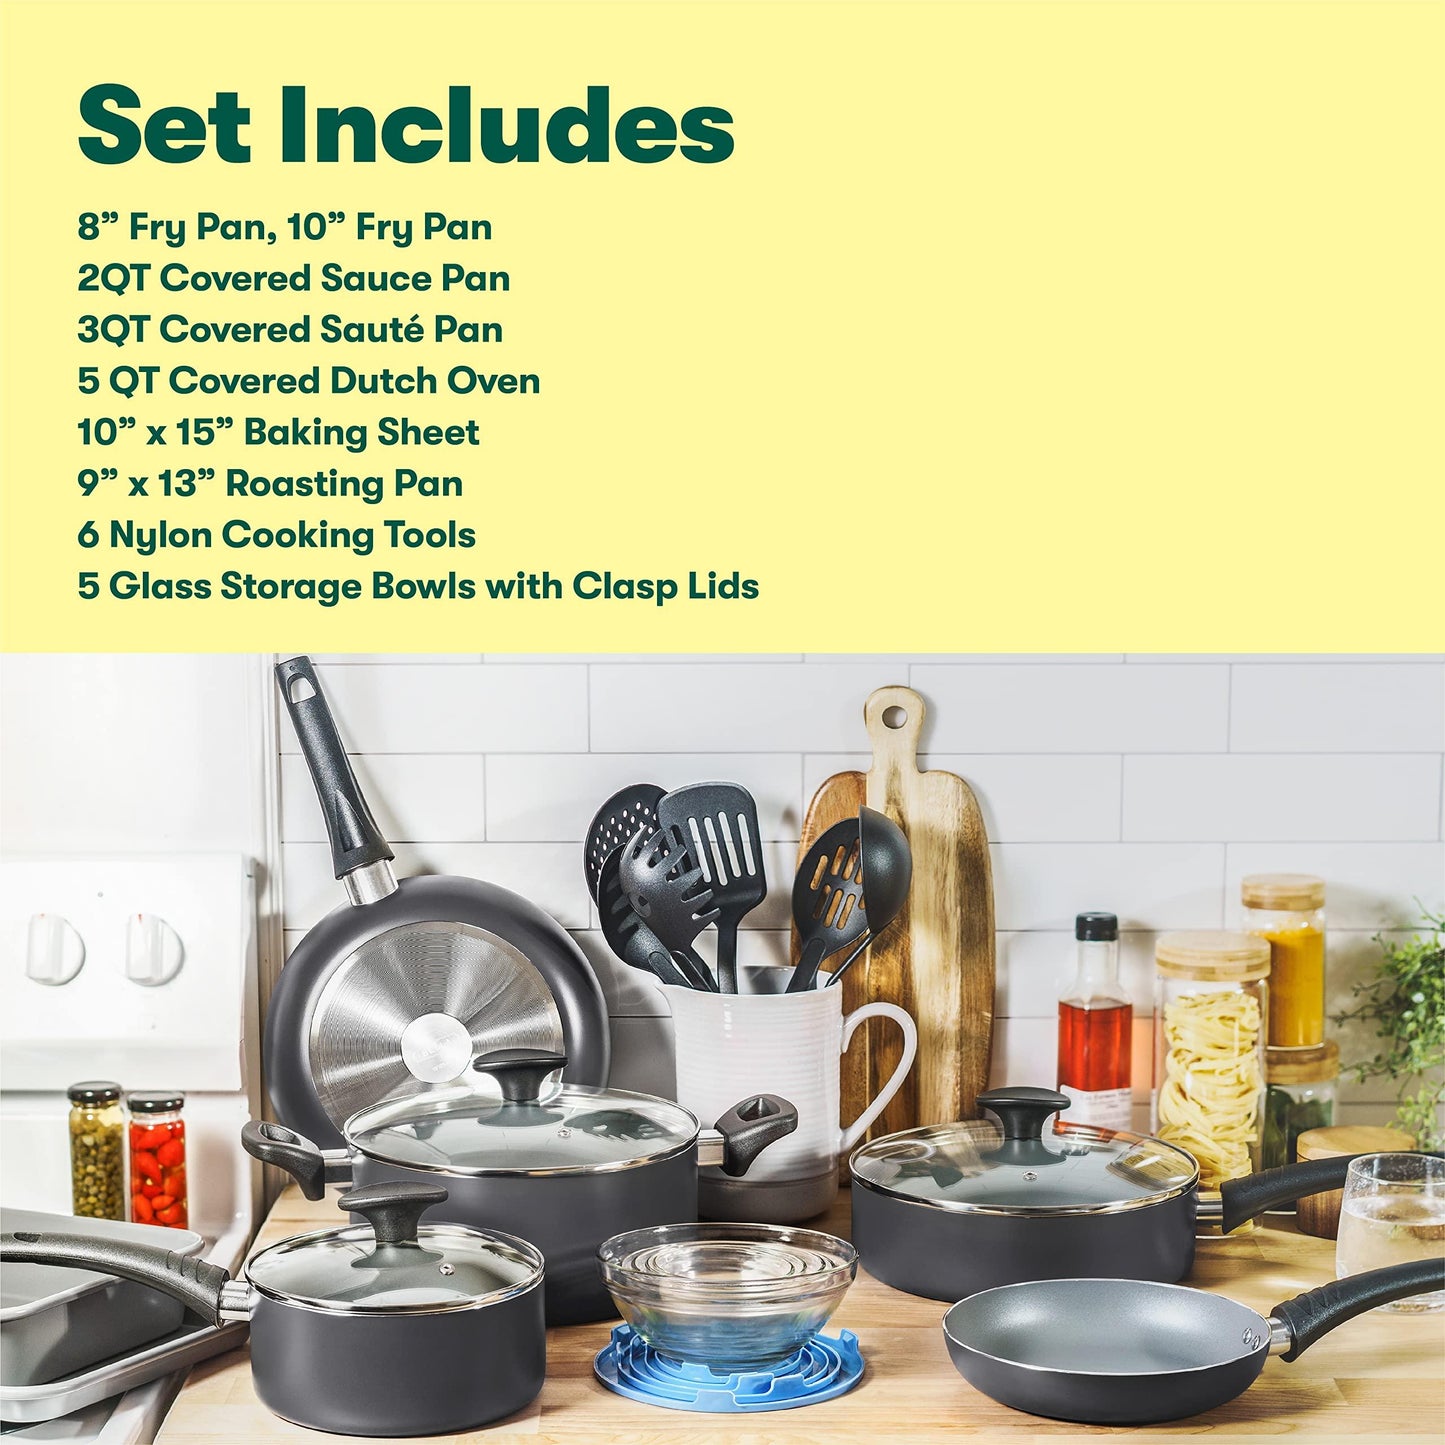 BELLA Nonstick Cookware Set with Glass Lids - Aluminum Bakeware, Pots and Pans, Storage Bowls & Utensils, Compatible with All Stovetops, 21 Piece, Black - CookCave